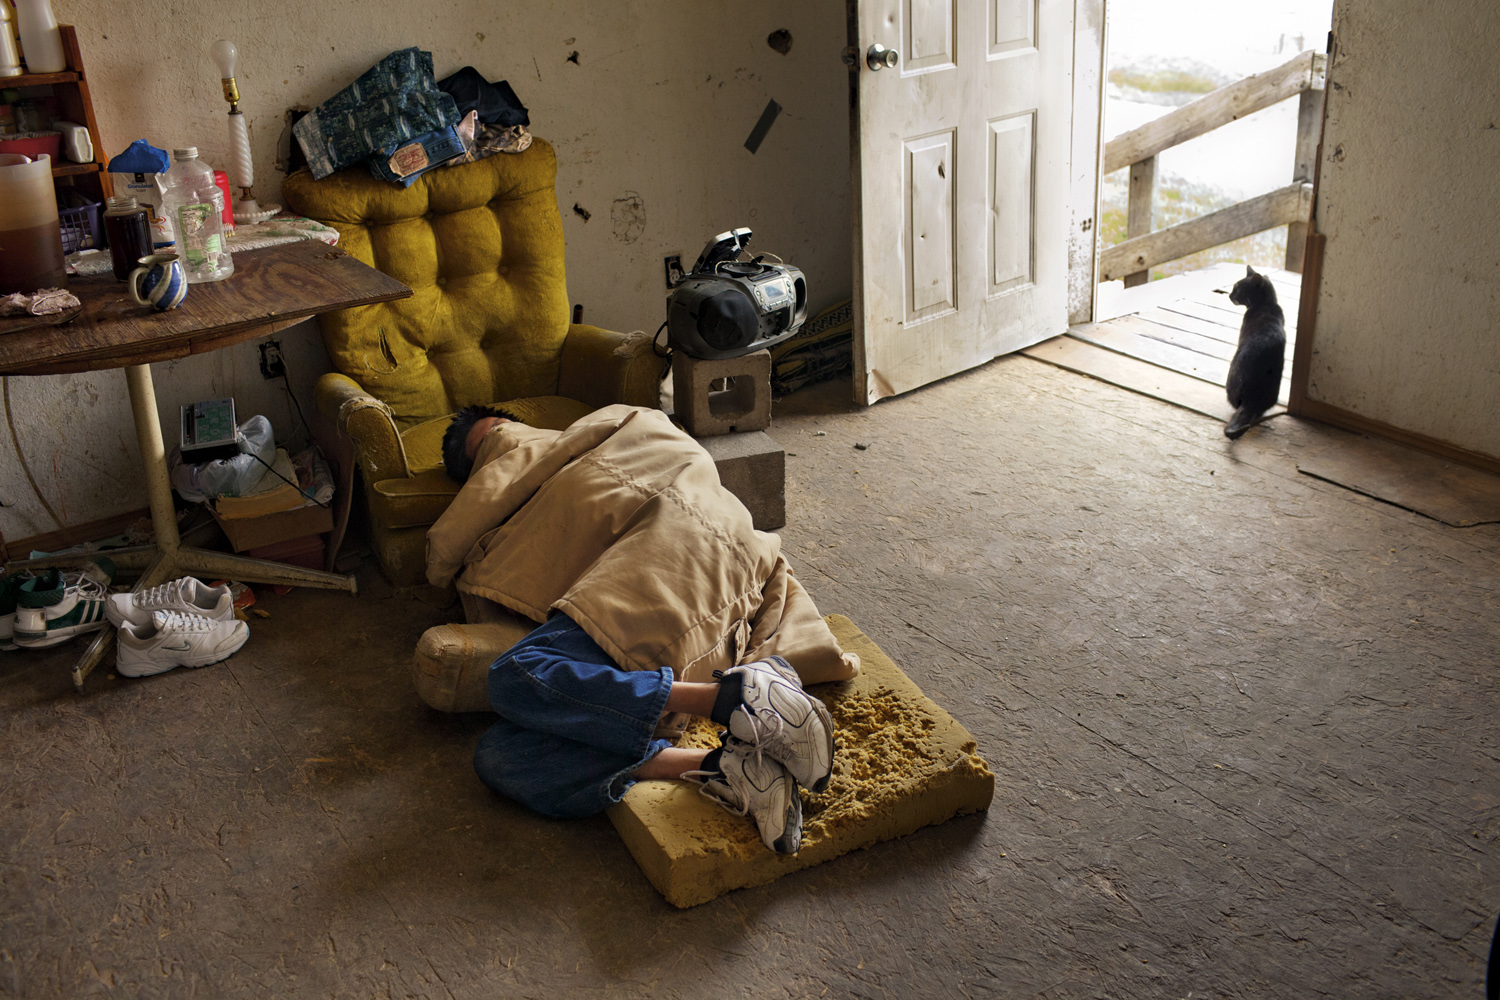 A young man suffering from the effects of a neurological disease and alcoholism sleeps in the living room of his home, six miles from the nearest town. Since the photograph was made, in May 2011, the house has been condemned, and he and the other occupants have moved elsewhere.